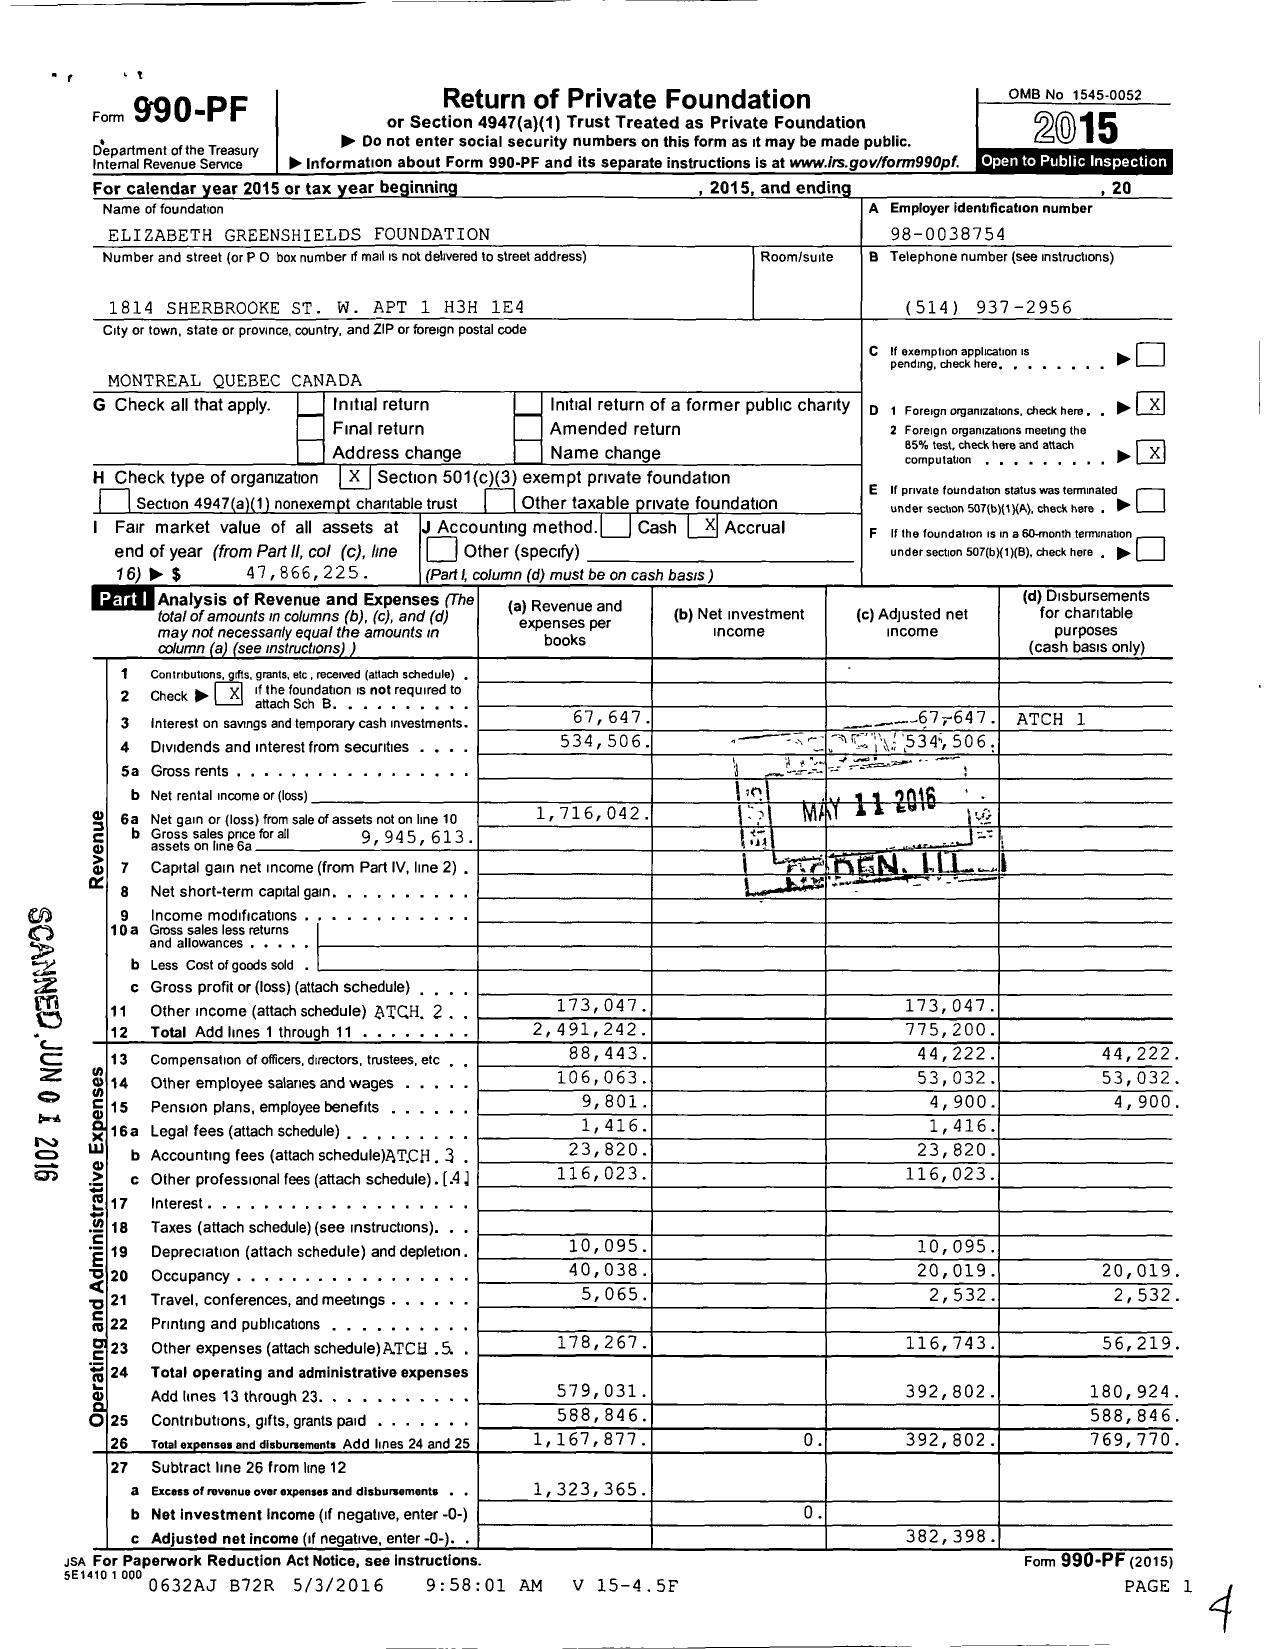 Image of first page of 2015 Form 990PF for Elizabeth Greenshields Foundation